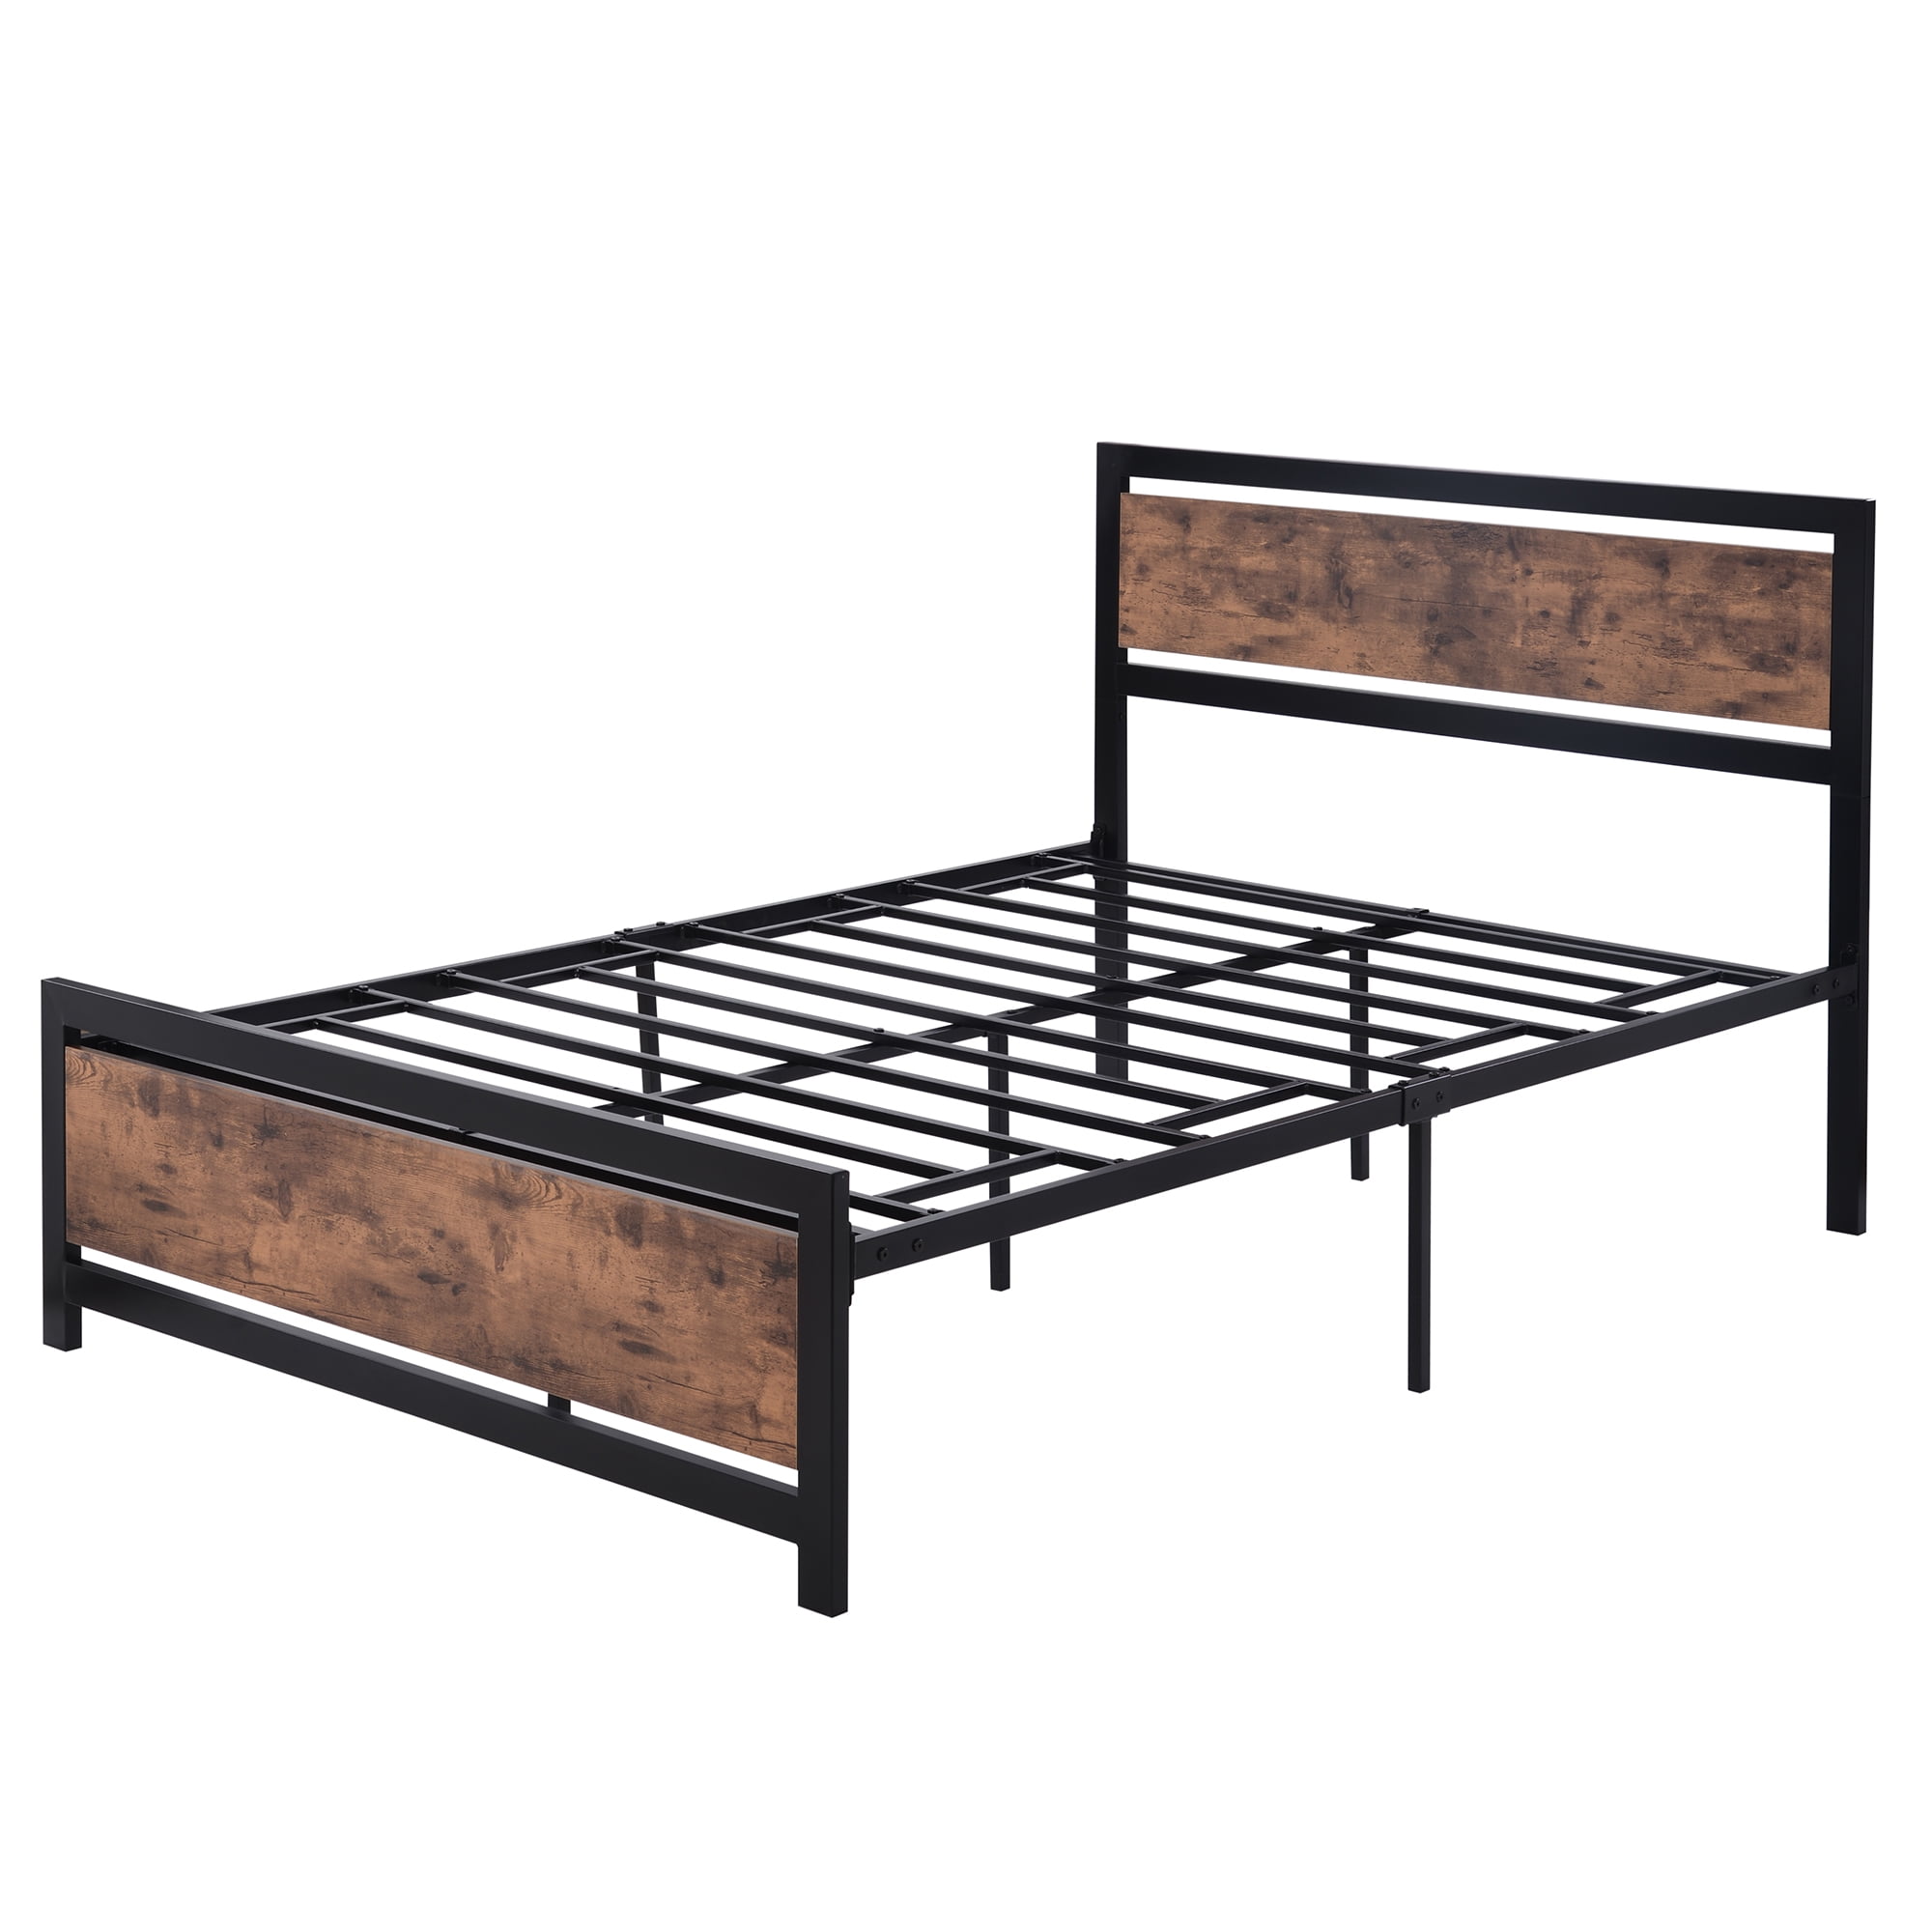 Metal And Wood Bed Frame With Headboard, Can You Attach A Wooden Headboard To Metal Frame